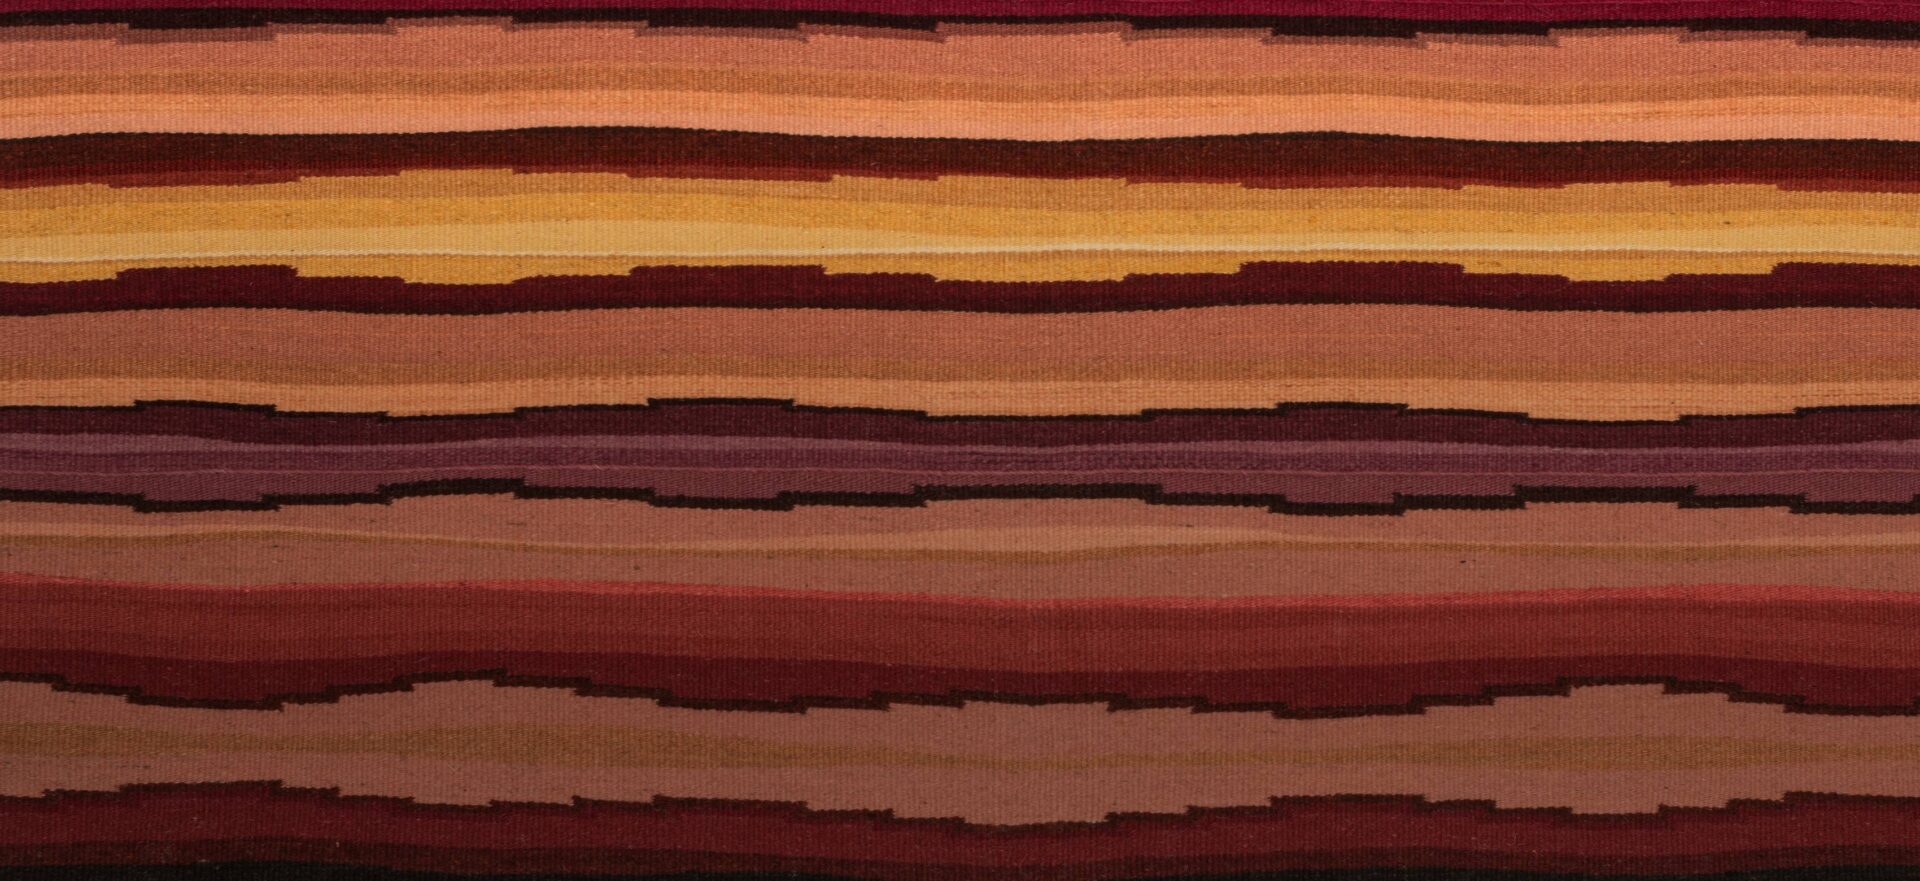 A textile with red, orange, and brown stripes.